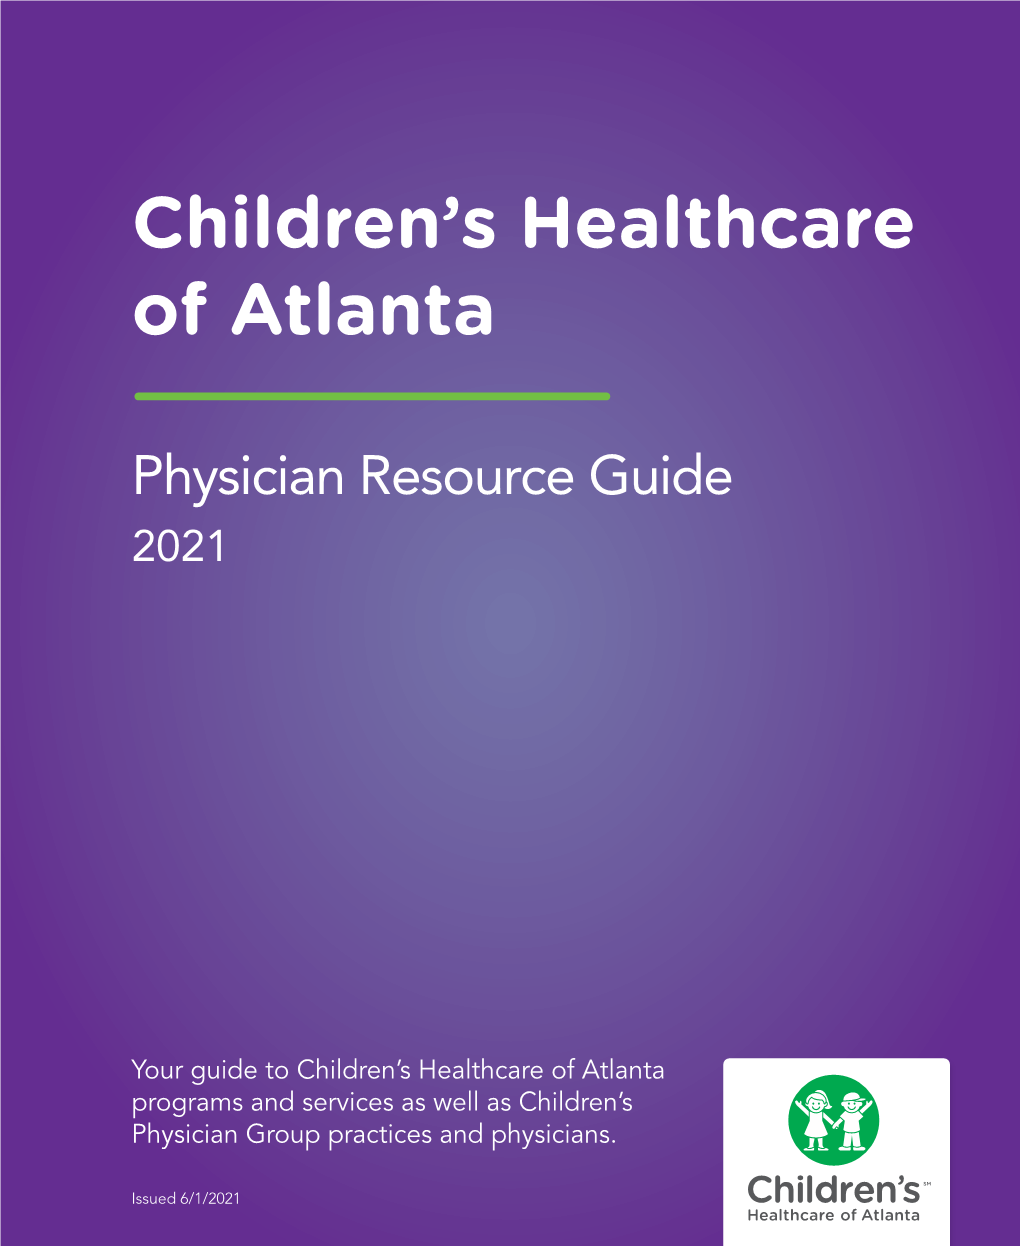 Physician Resource Guide 2021